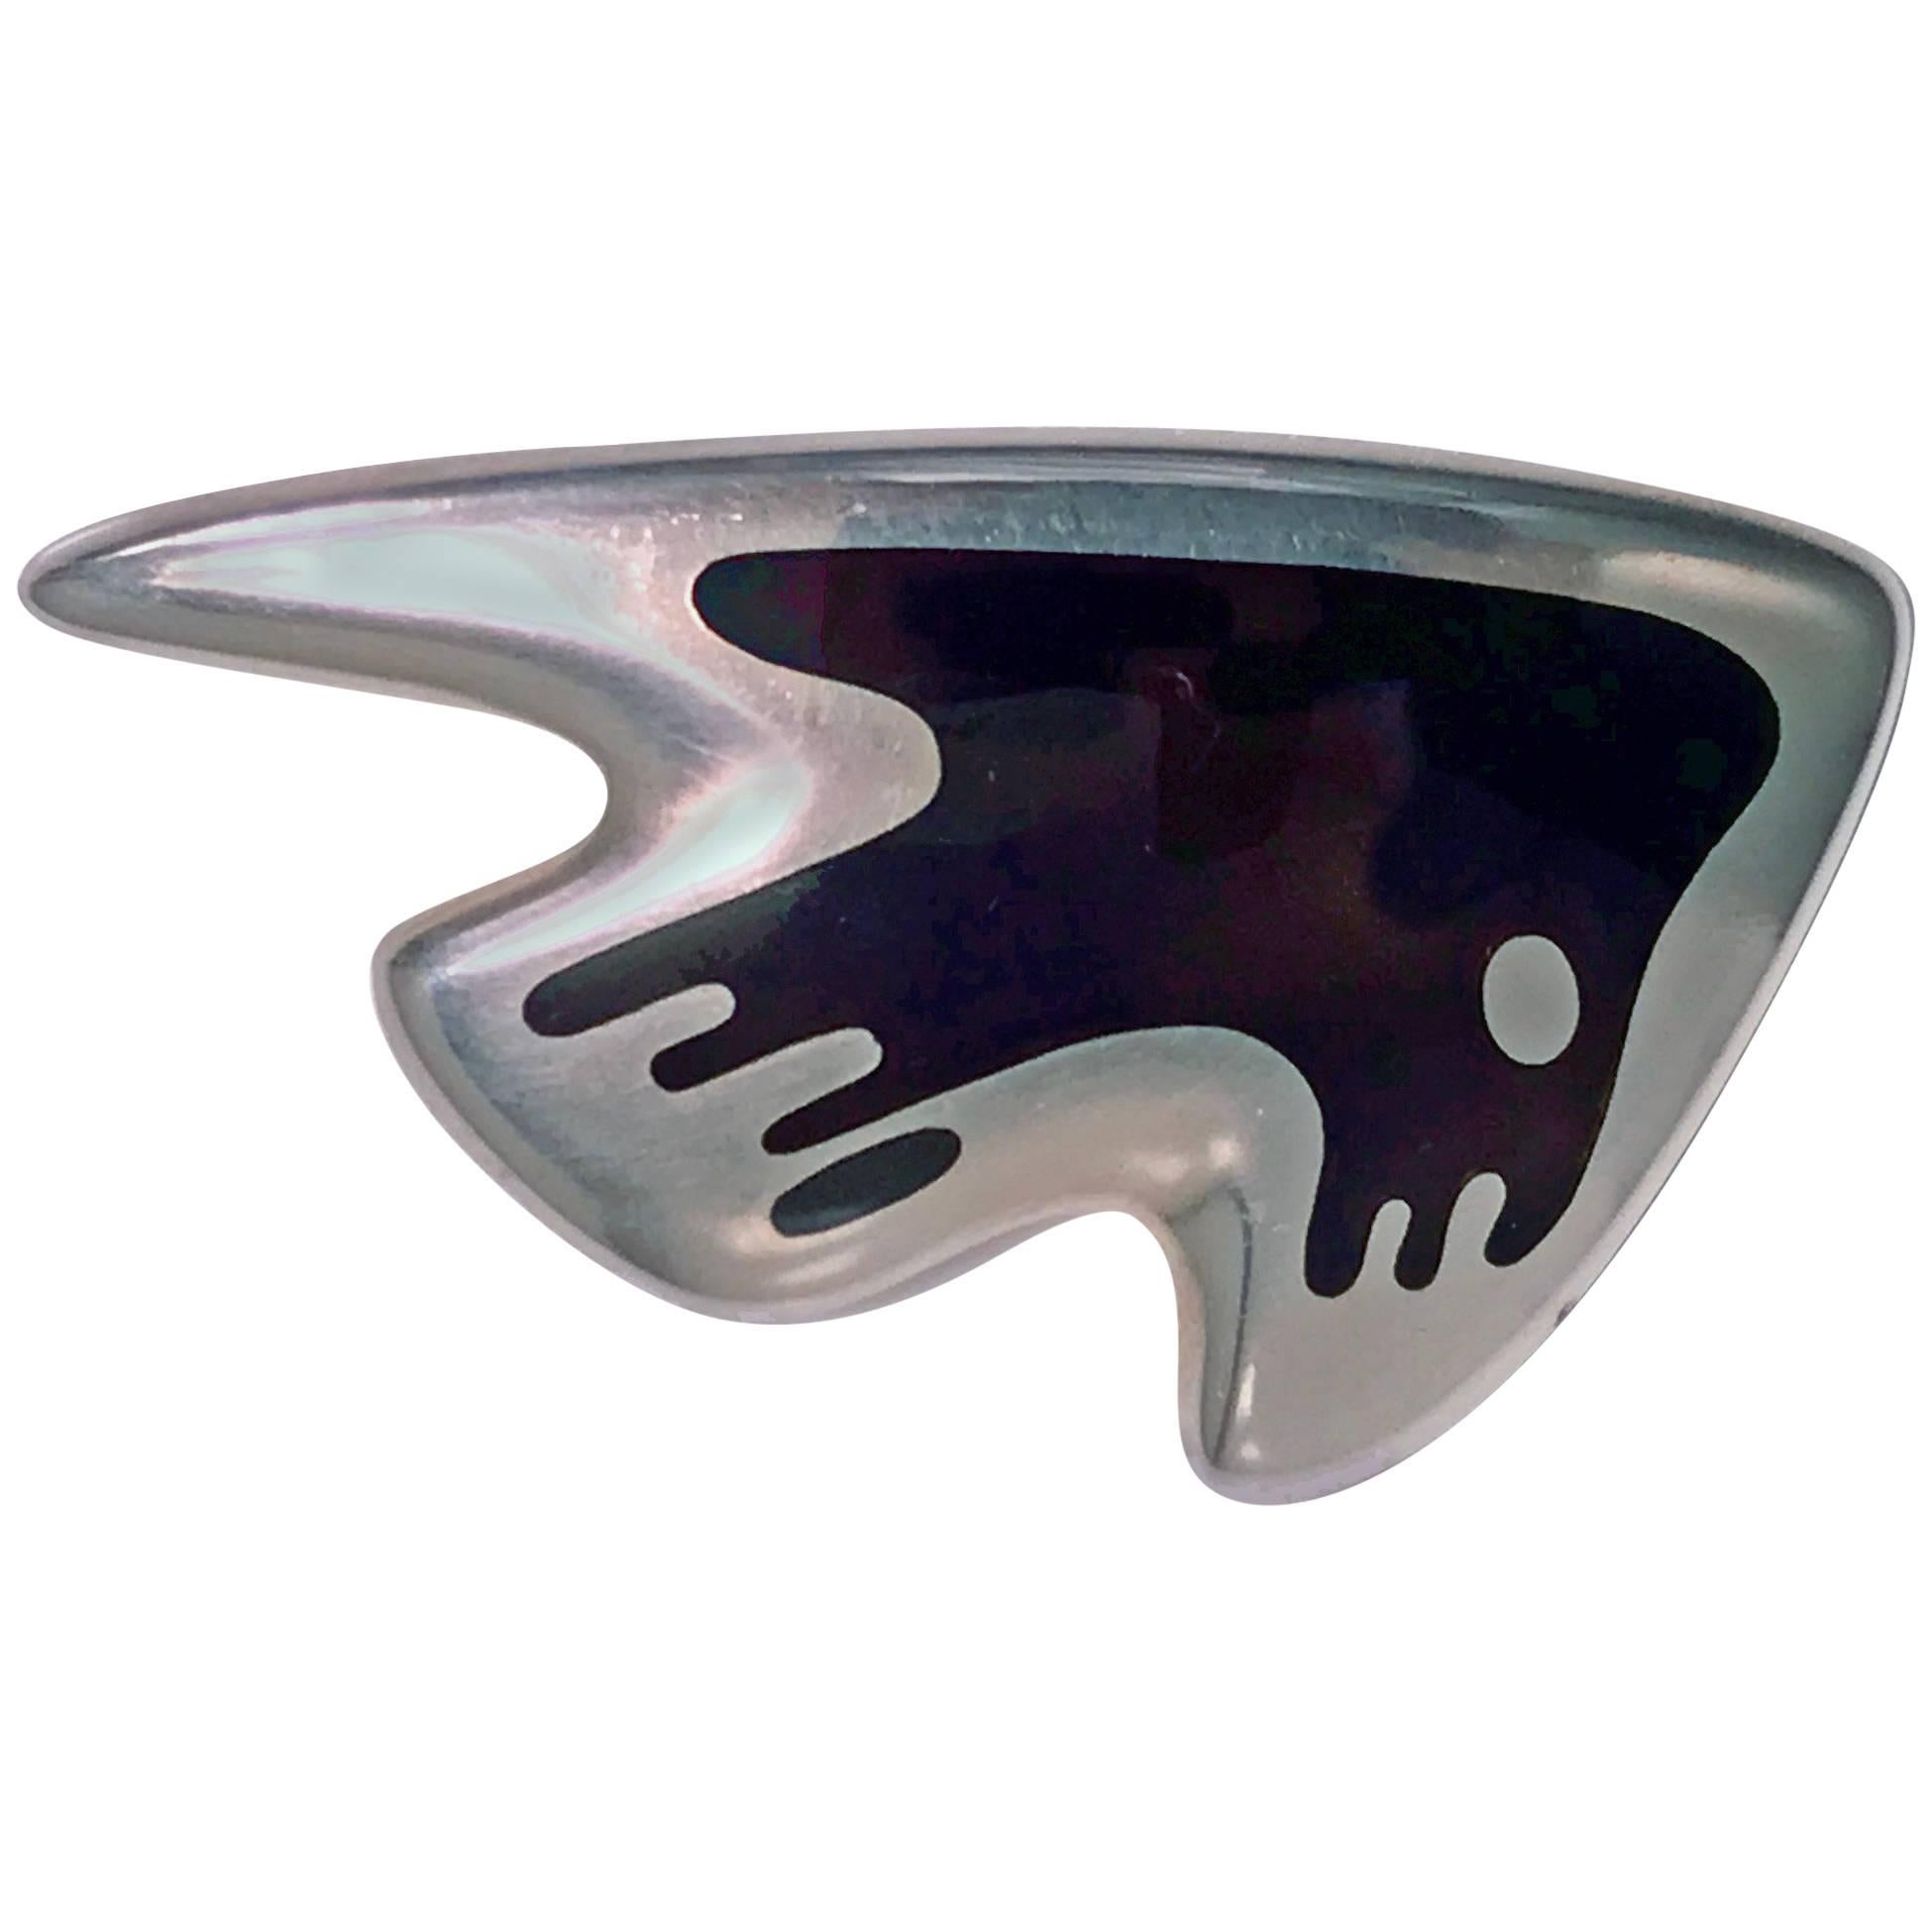 Georg Jensen Henning Koppel abstract sculptural enamel and sterling Brooch, Denmark, C.1947. The Brooch of sculptural abstract form, two tone mauve enamel. Full marks to reverse and HK for Henning Koppel and numbered 307. See pp 118 Georg Jensen